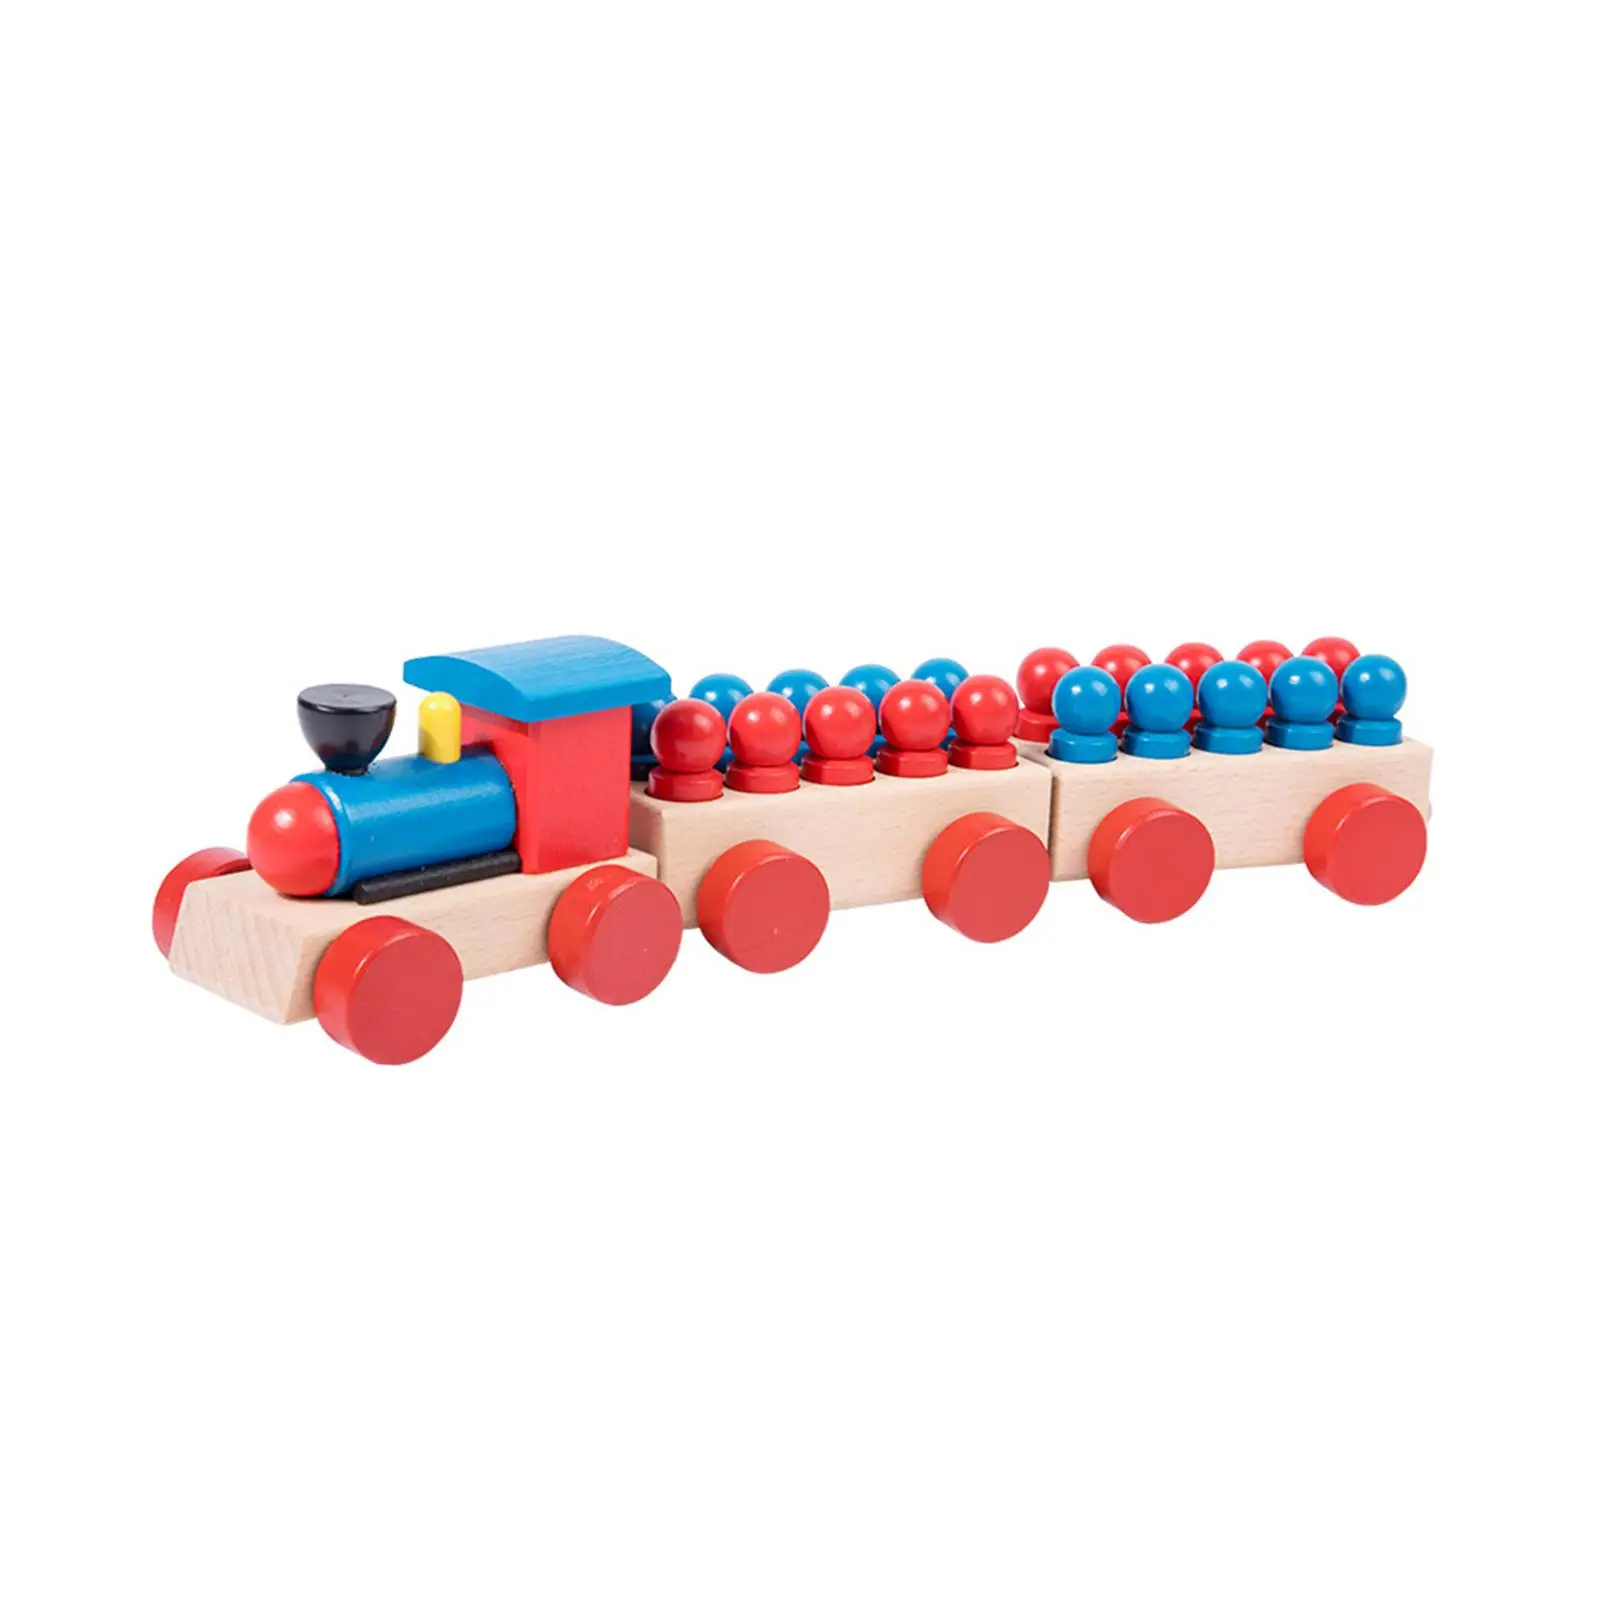 Wooden Stacking Train Preschool Educational Toys Problem Solving Montessori Math Toys Teaching Aids for Baby Kids 1 2 3 Year Old